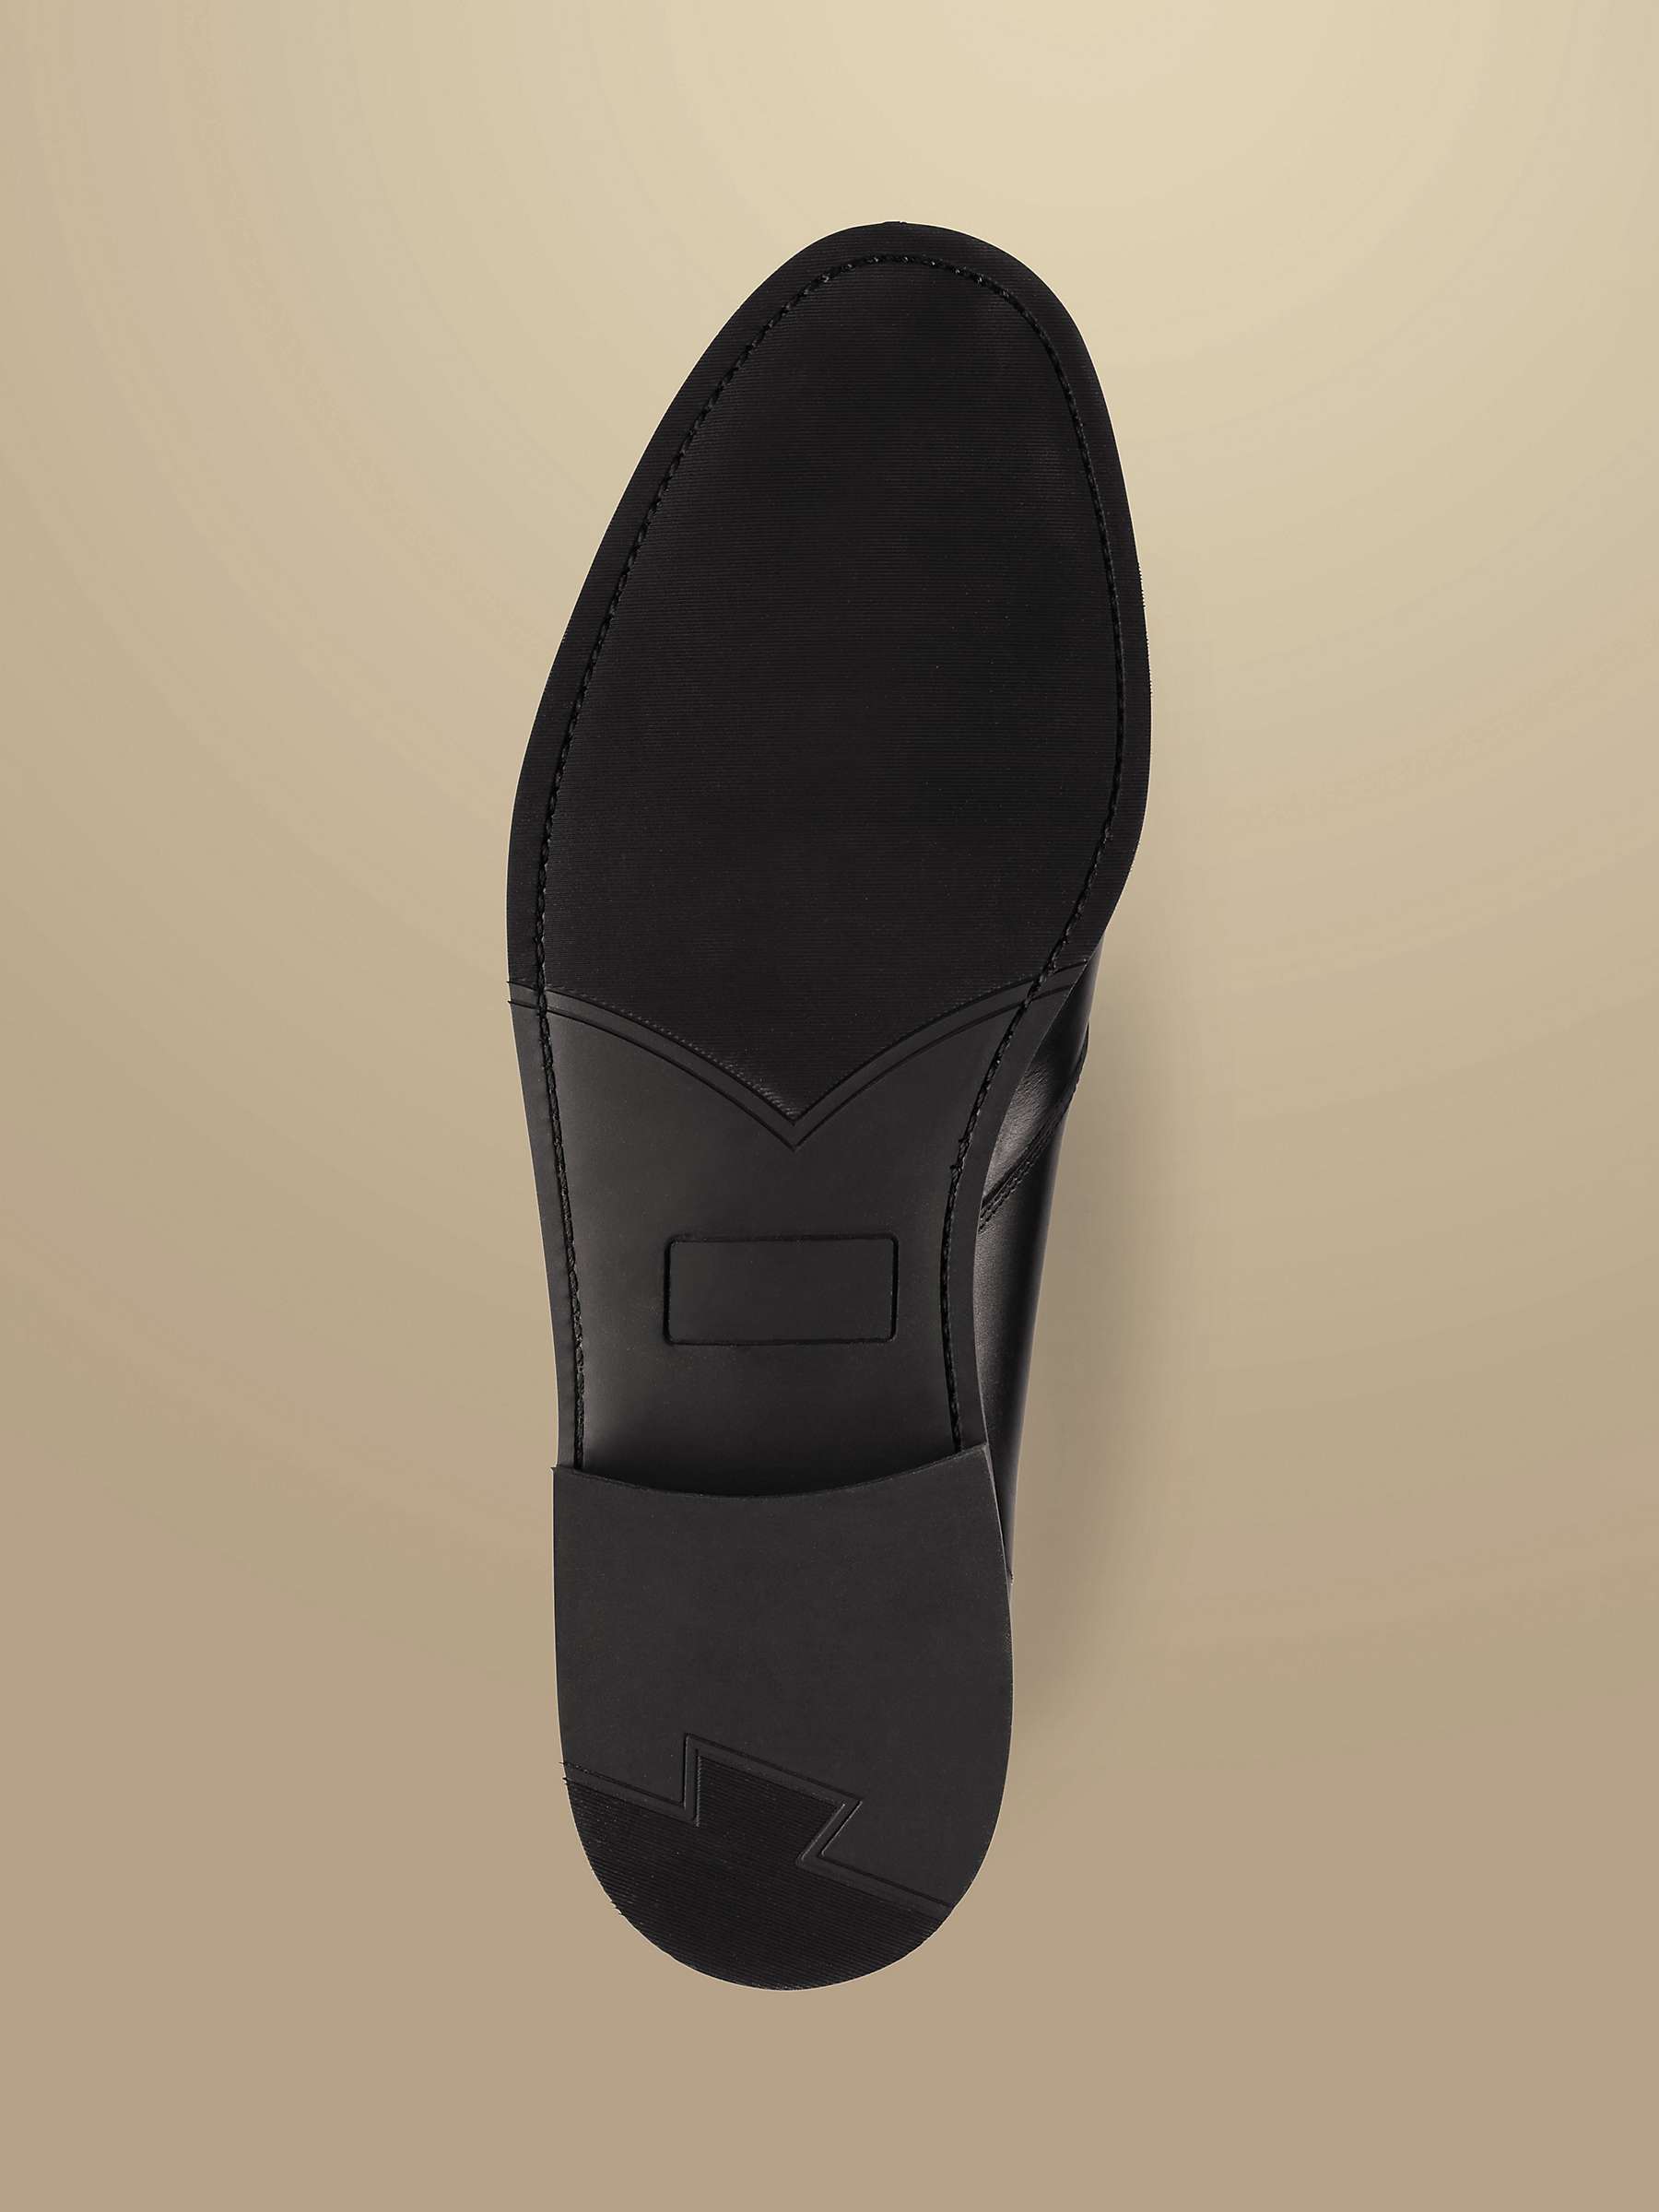 Buy Charles Tyrwhitt Leather Derby Shoes, Black Online at johnlewis.com